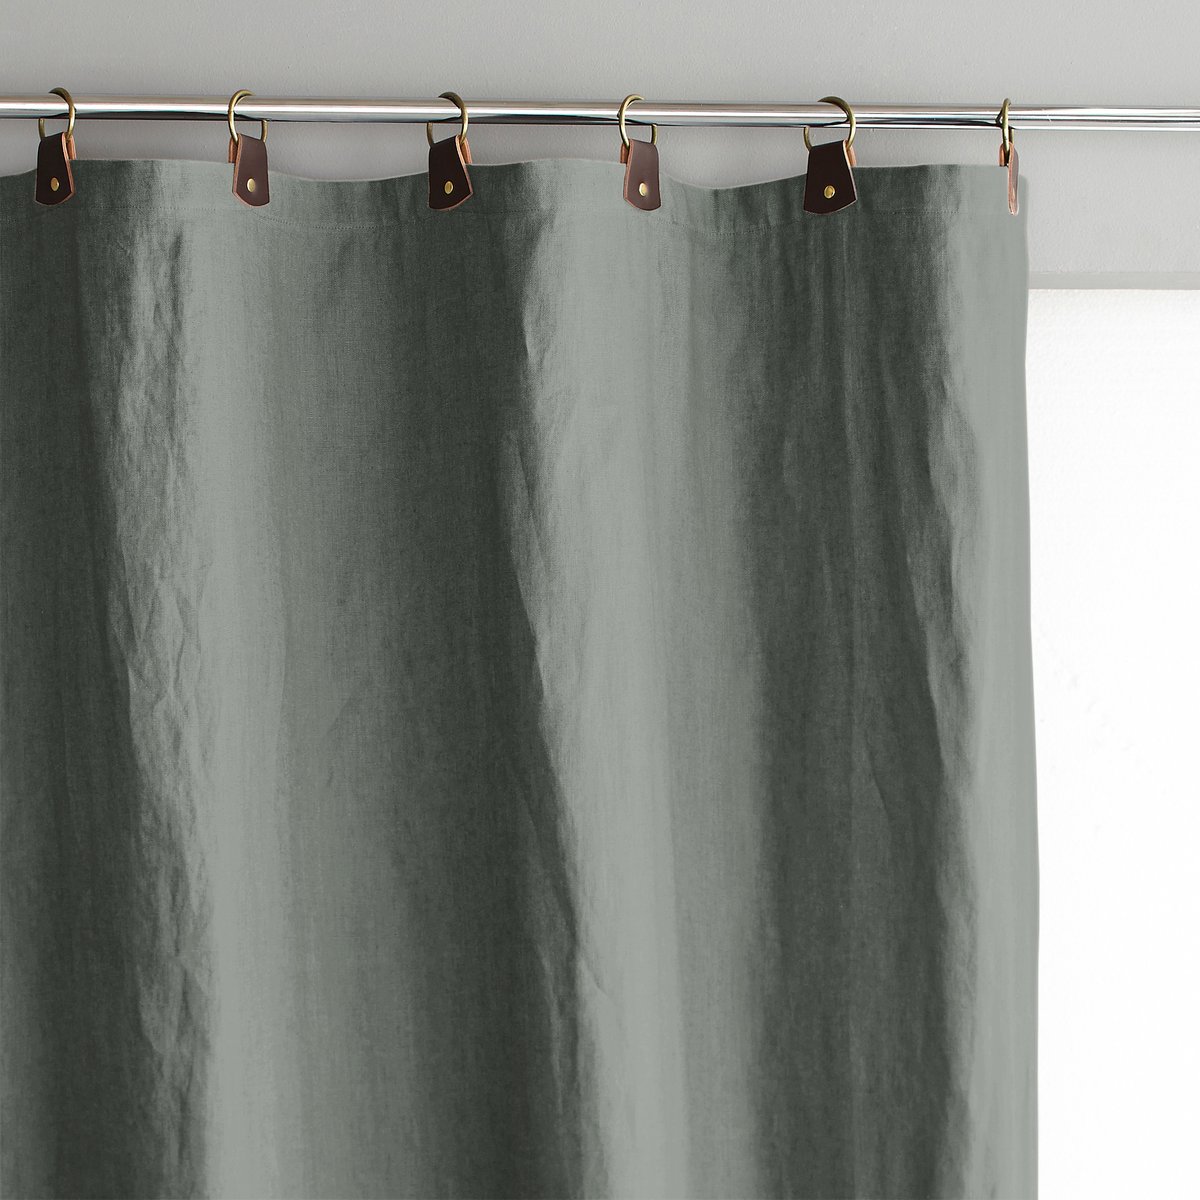 Image of Private Single Pre-Washed Linen Curtain with Leather Tabs